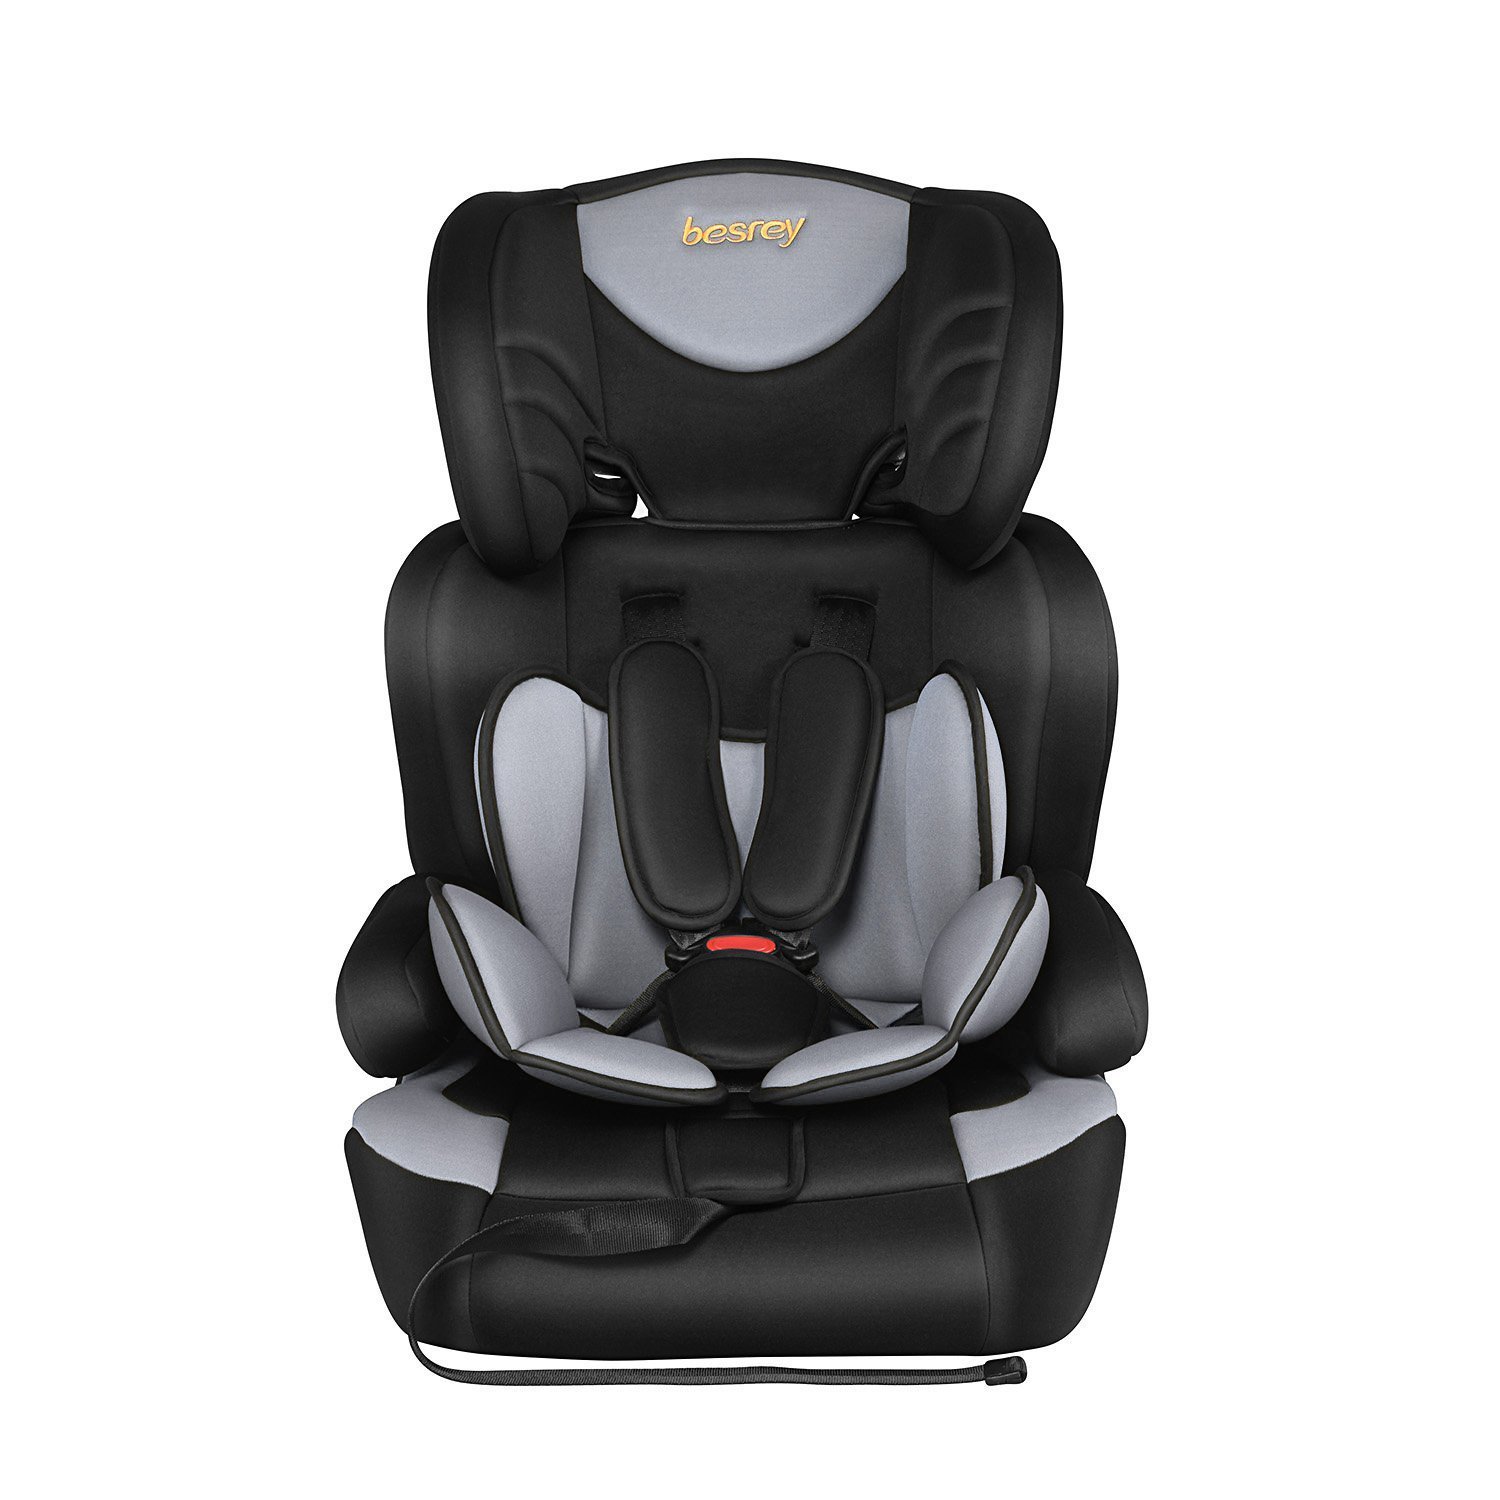 Besrey Child Car Seat Group 1 / 2 / 3 (9 - 36 kg). Adjustable Car seat for children 9 months - 12 years. ECE R44/04 Secured with safety belts, no Isofix. grey